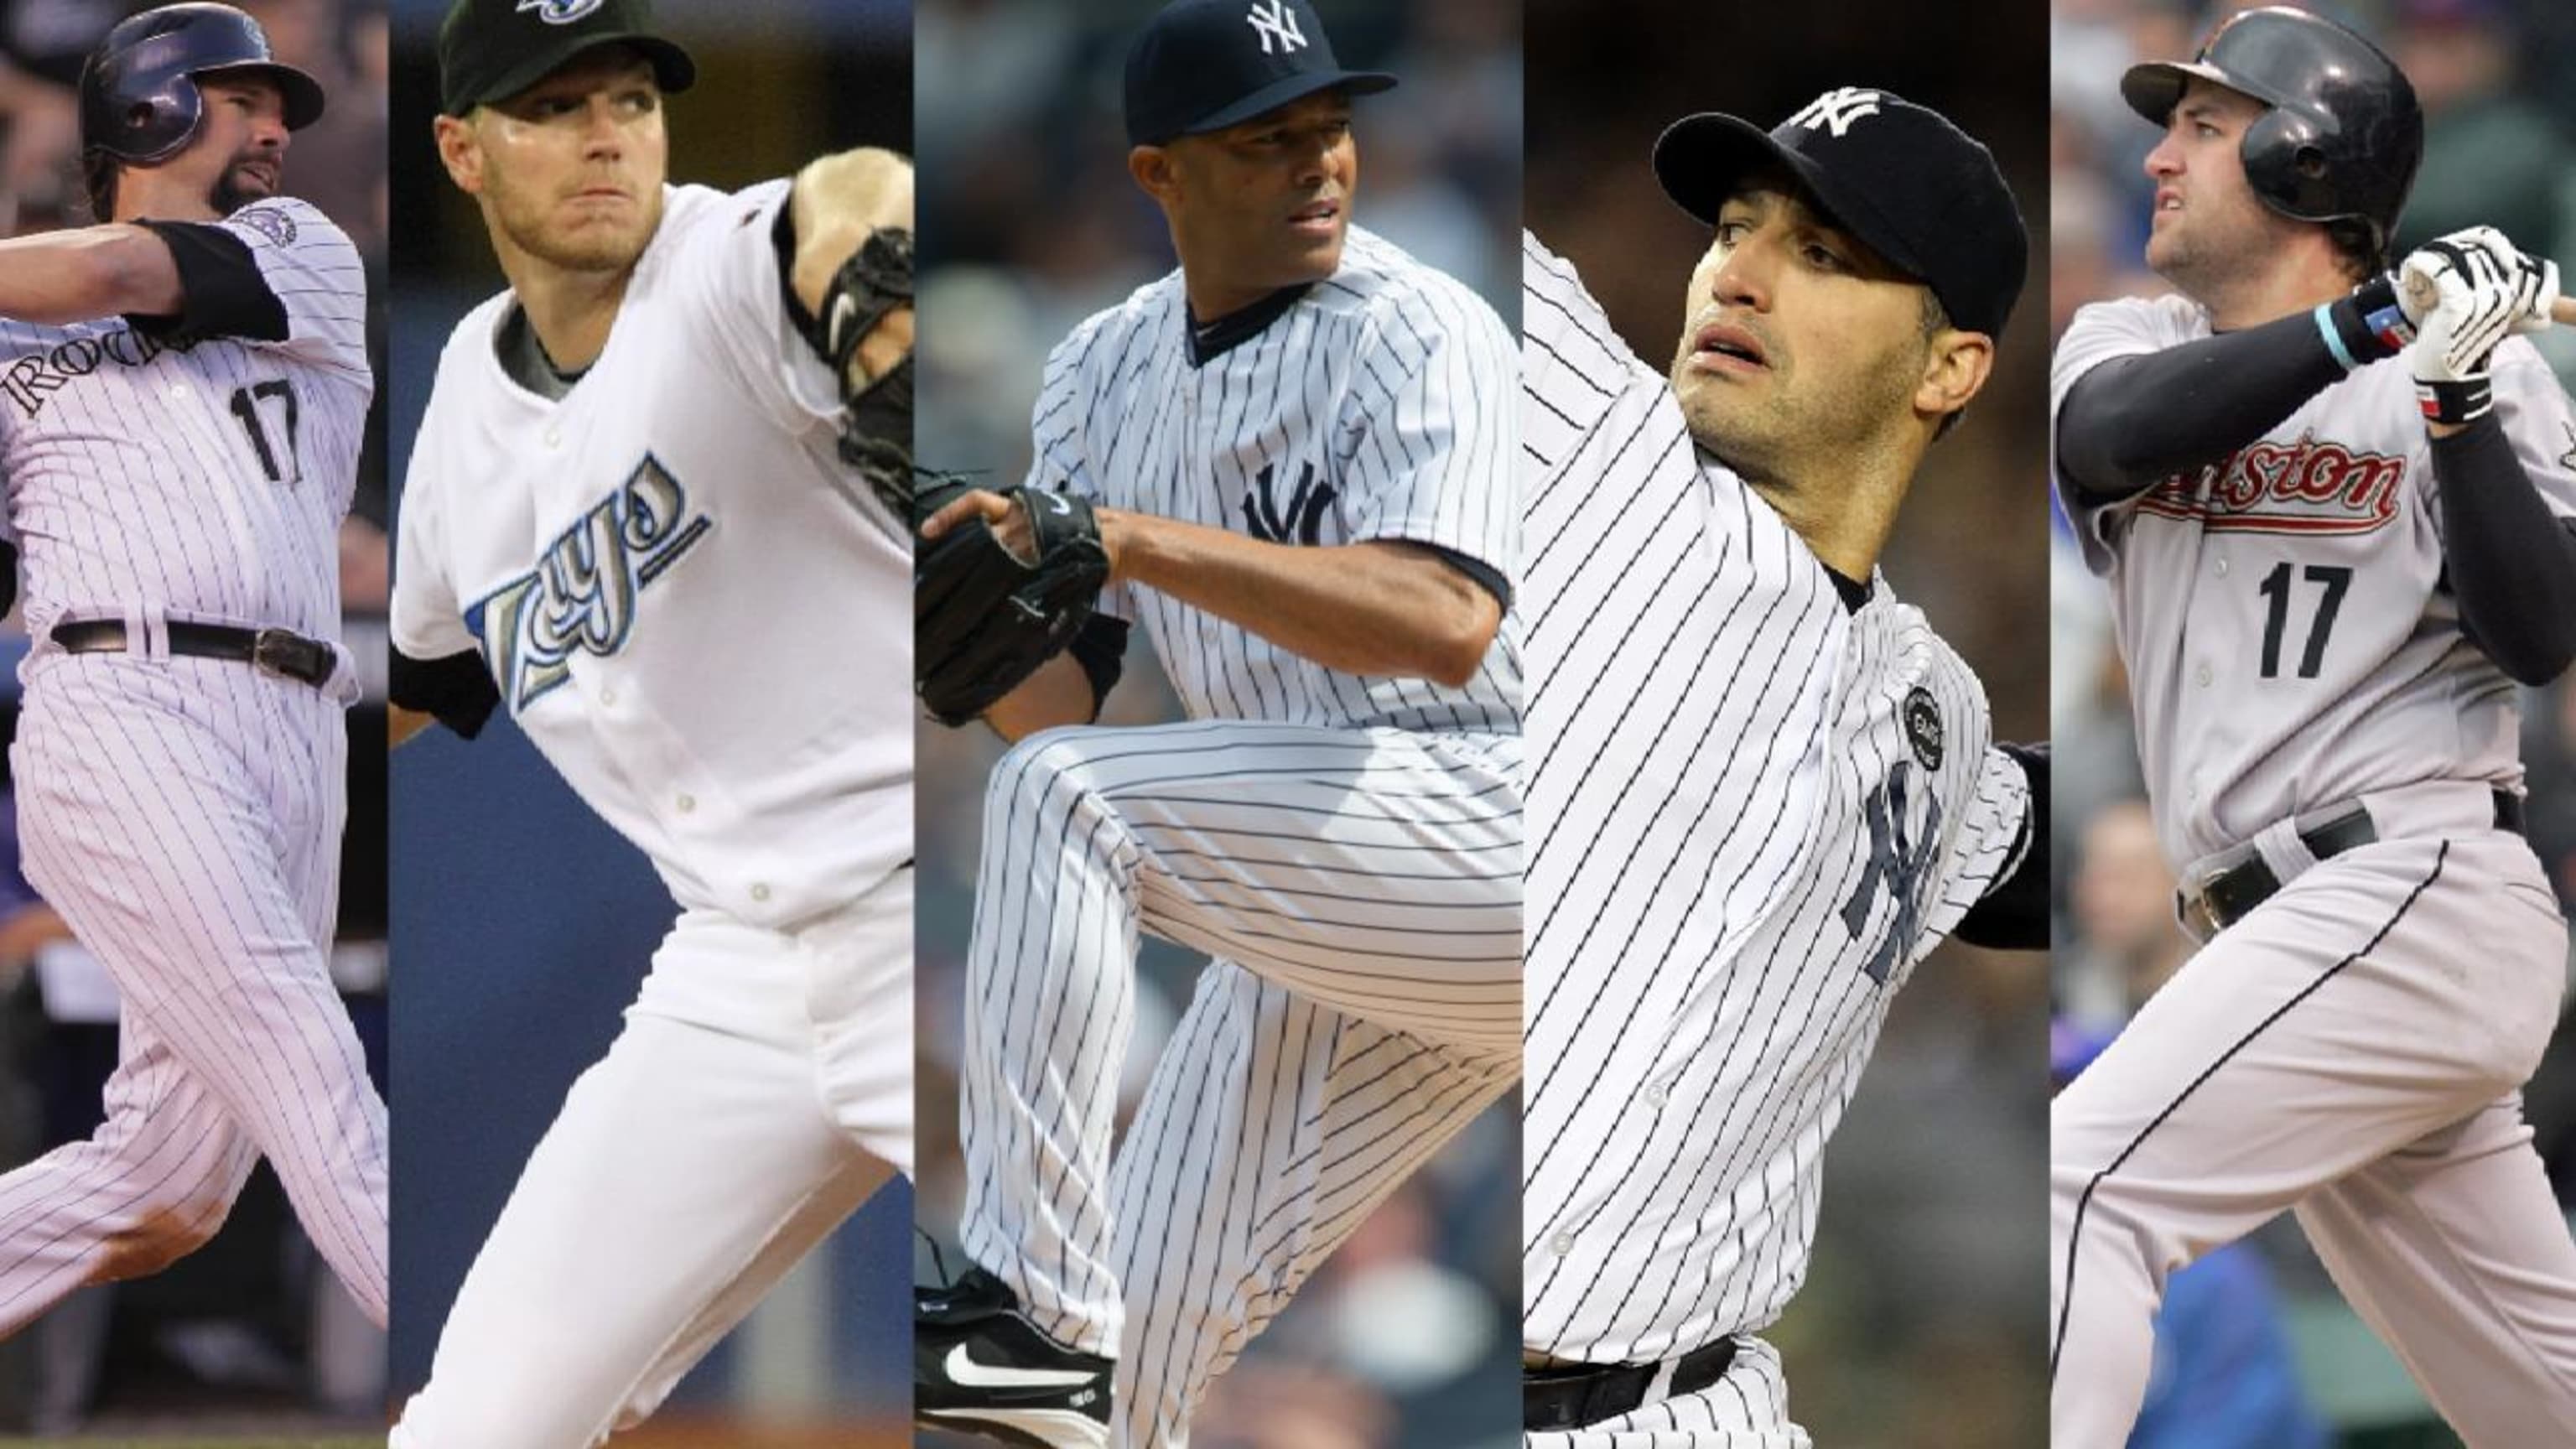 Yankees' legend Andy Pettitte gets my Hall of Fame vote. Here's